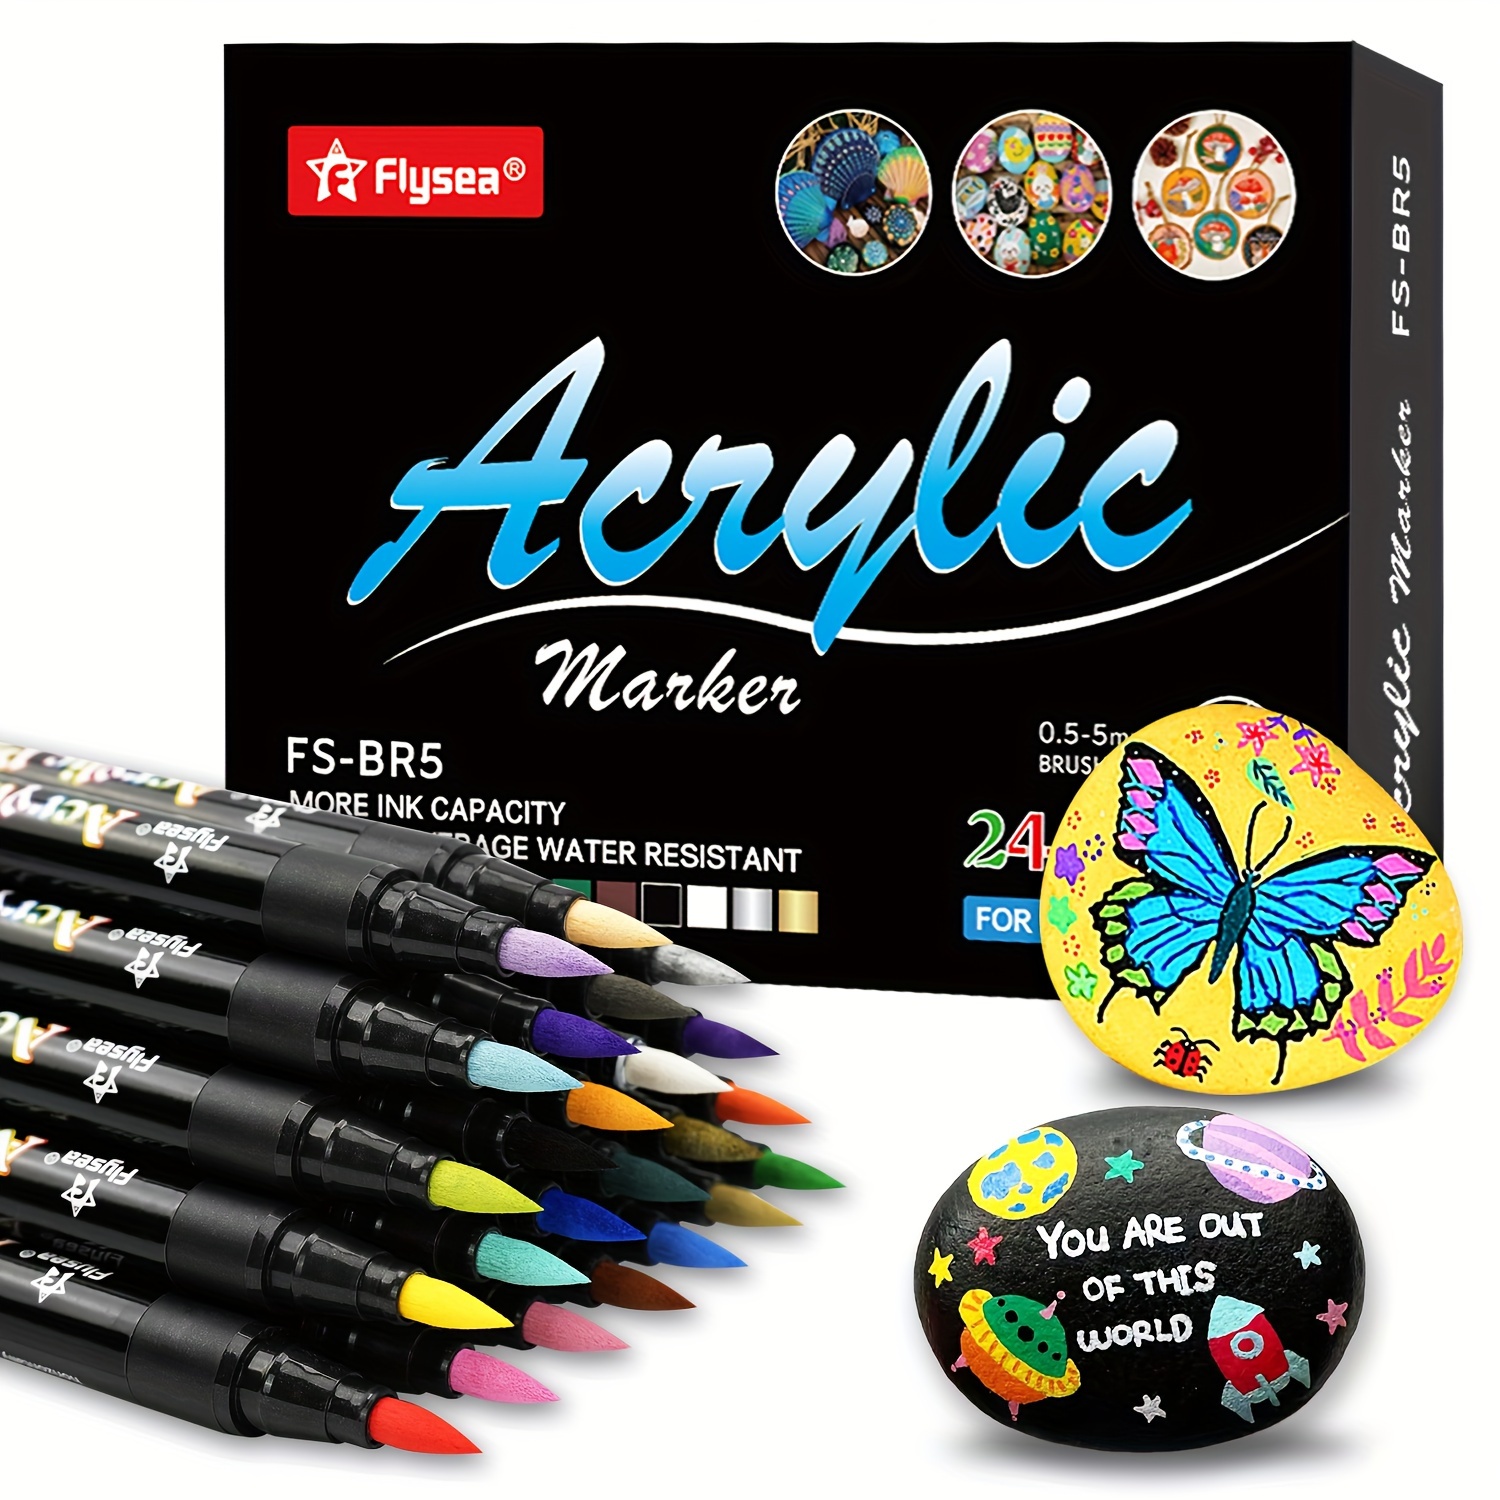 

24pcs Soft Tip Acrylic Markers, Acrylic Markers For Wood, Canvas, Stone, Rock Painting, Glass, Ceramic Surfaces